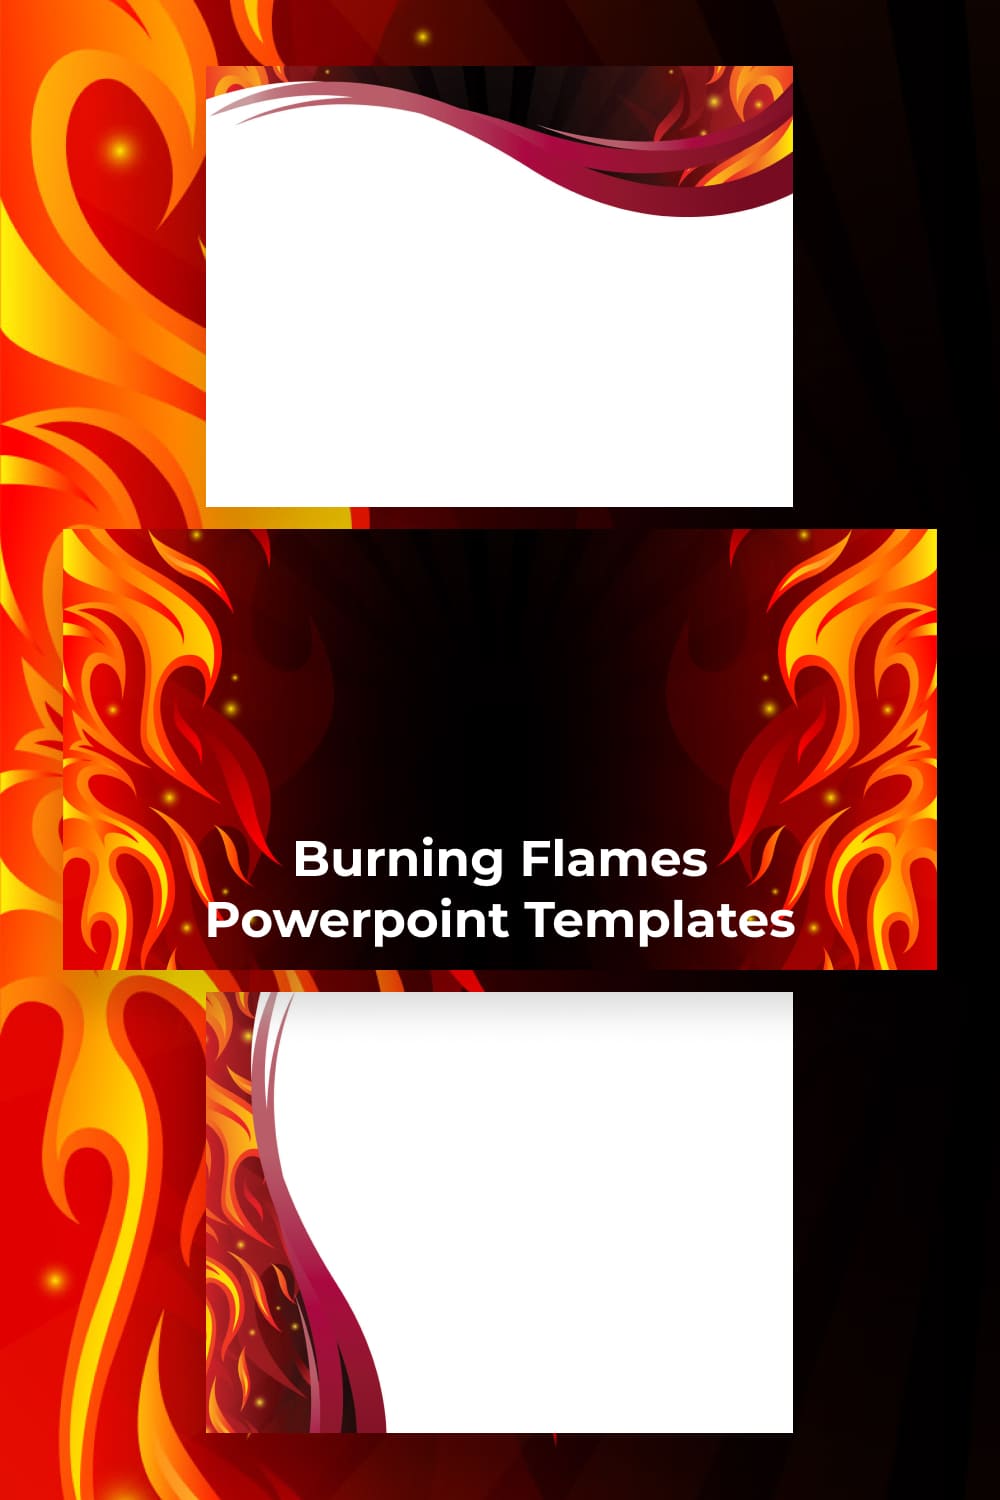 Burning flames powerpoint template.